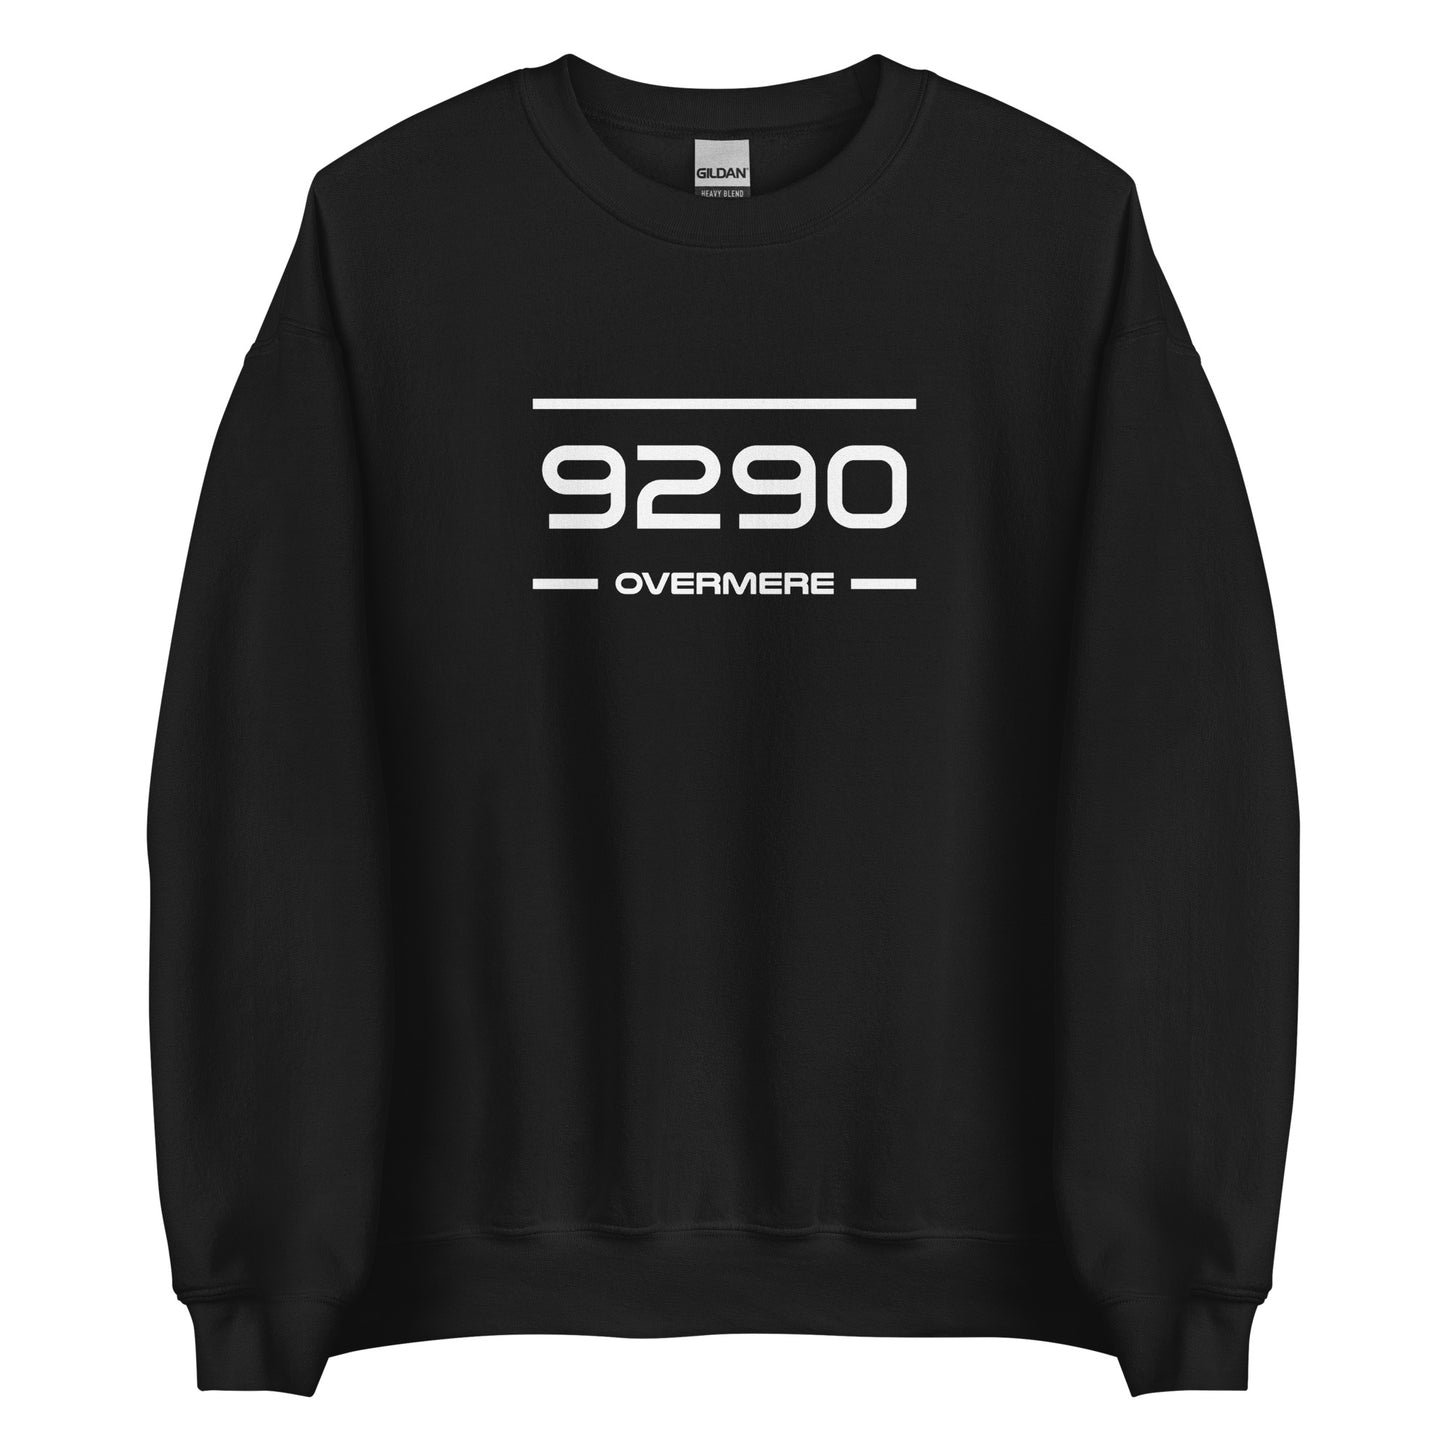 Sweater - 9290 - Overmere (M/V)